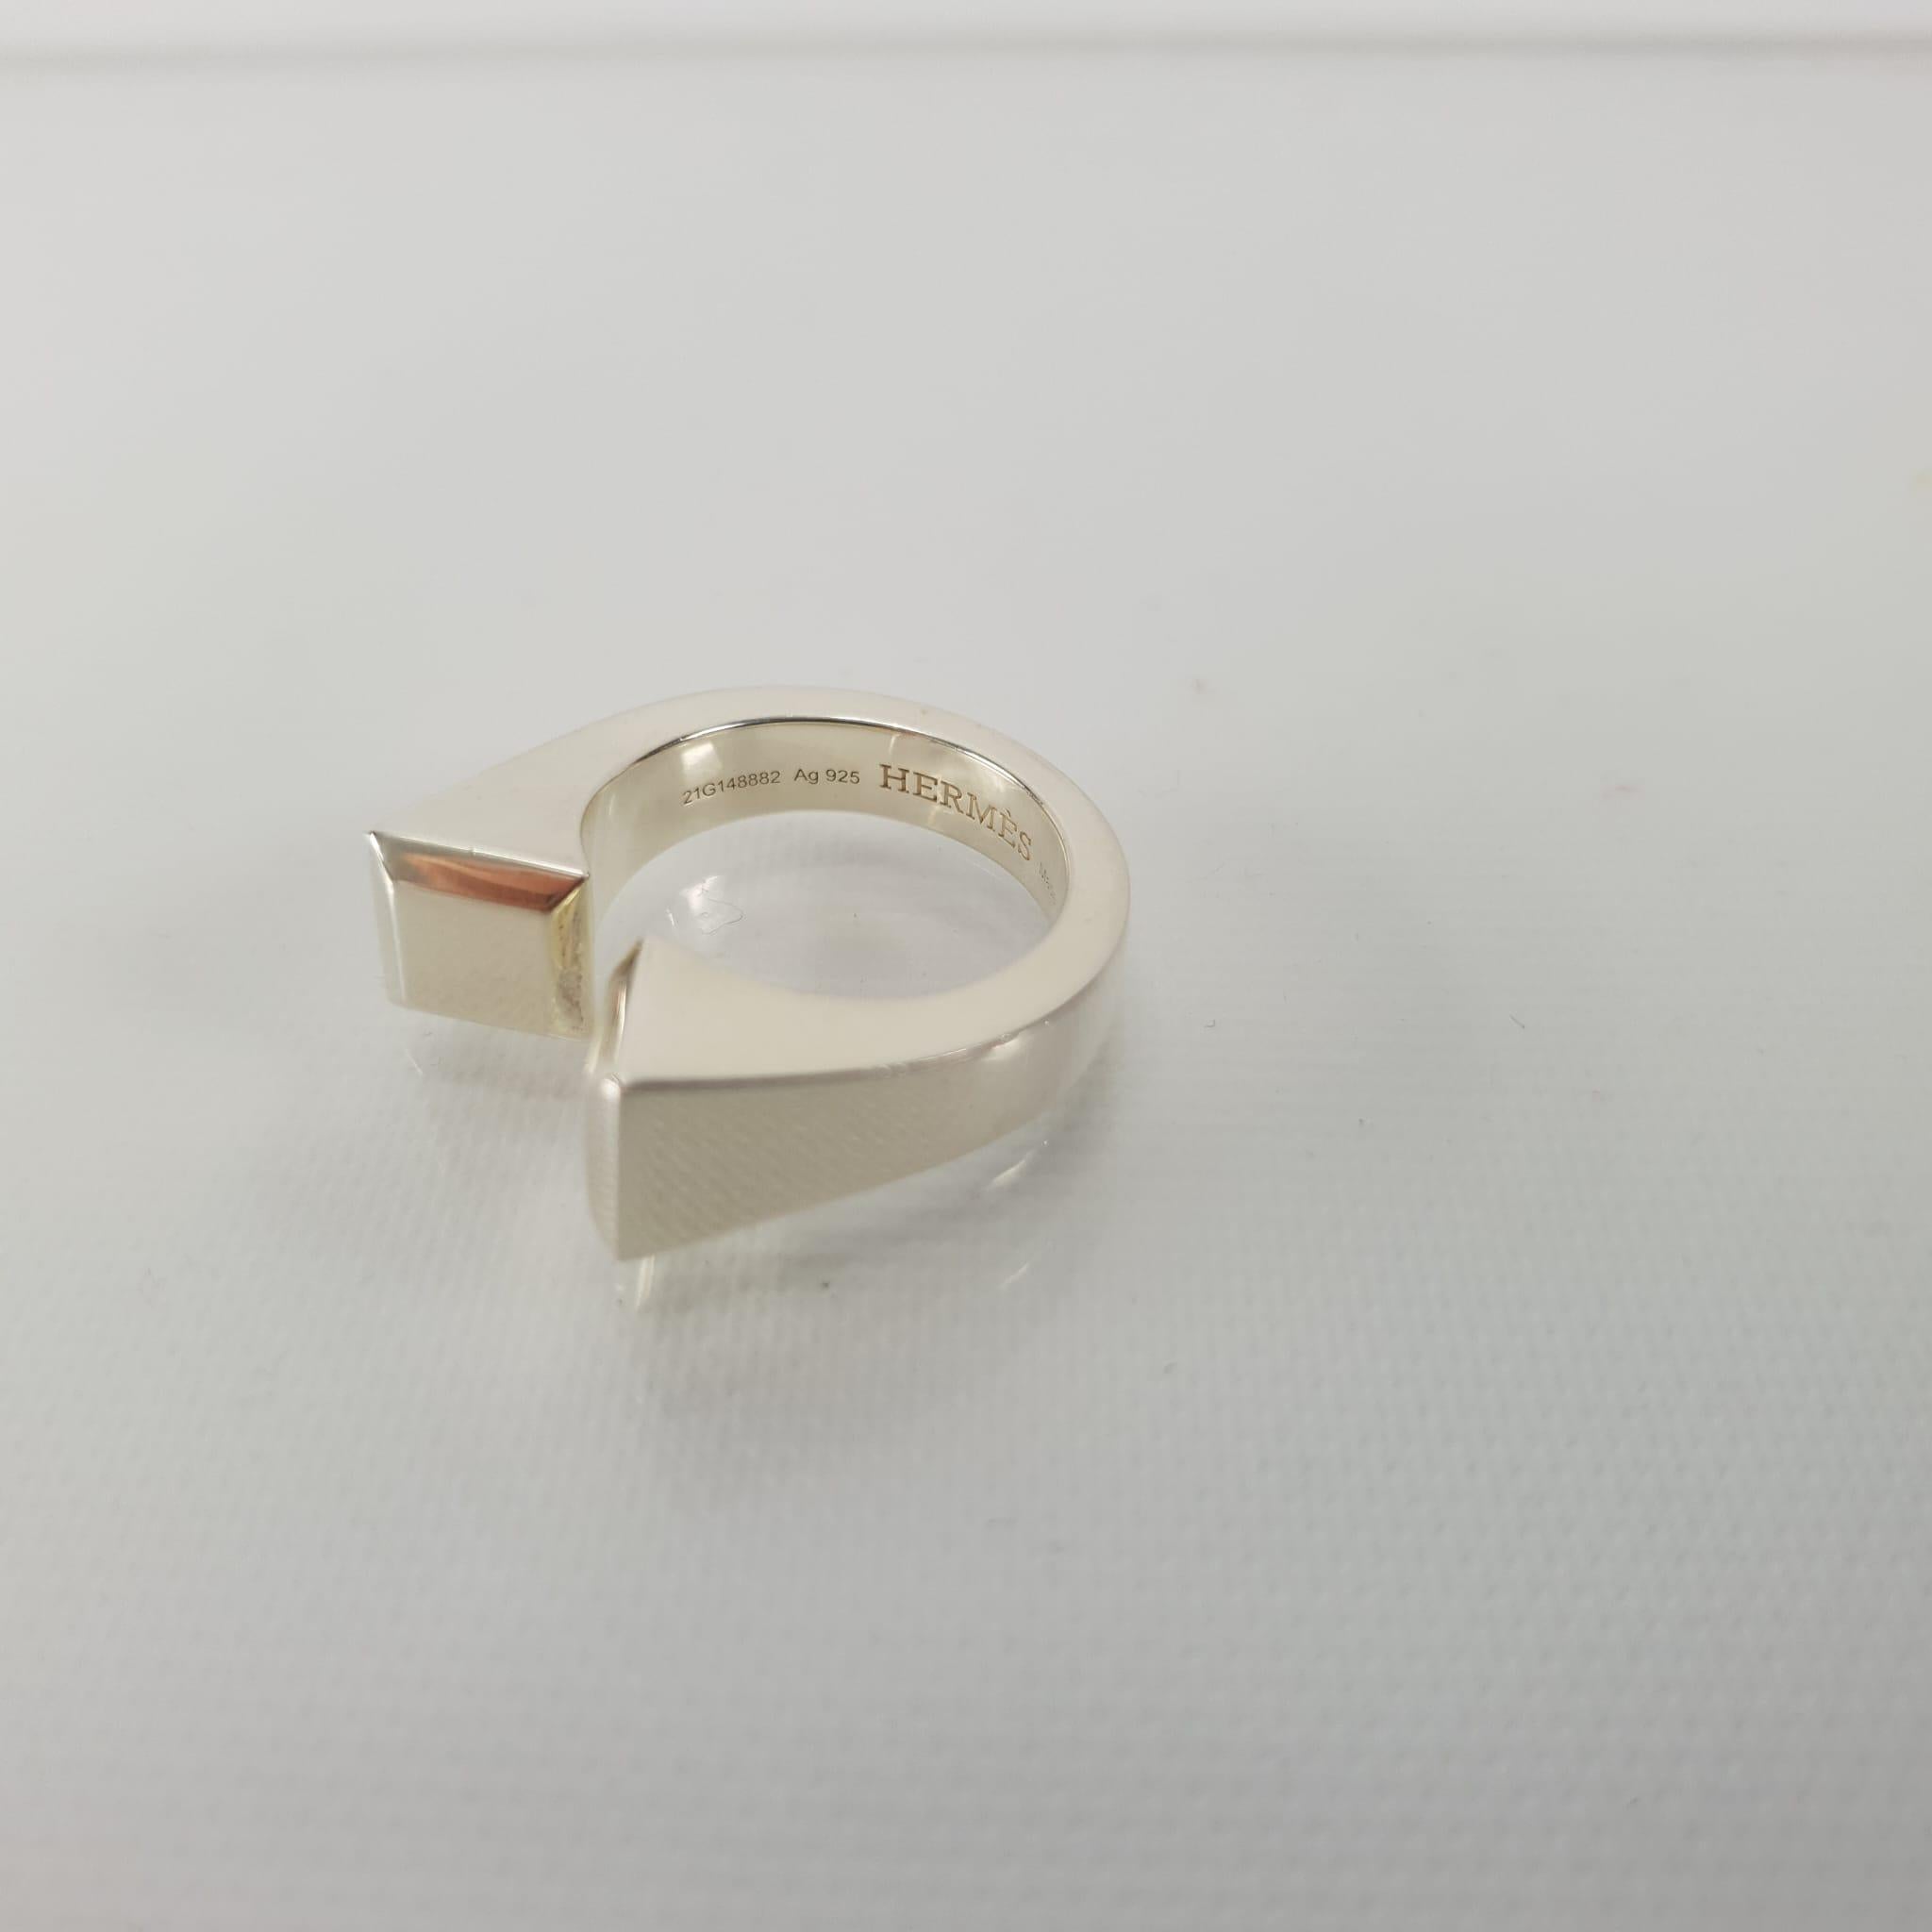 Hermes Silver 925/1000 Clou de forge ring, large model. Peloved, never used with box.  size Hermes 53 /Us 6 1/4
